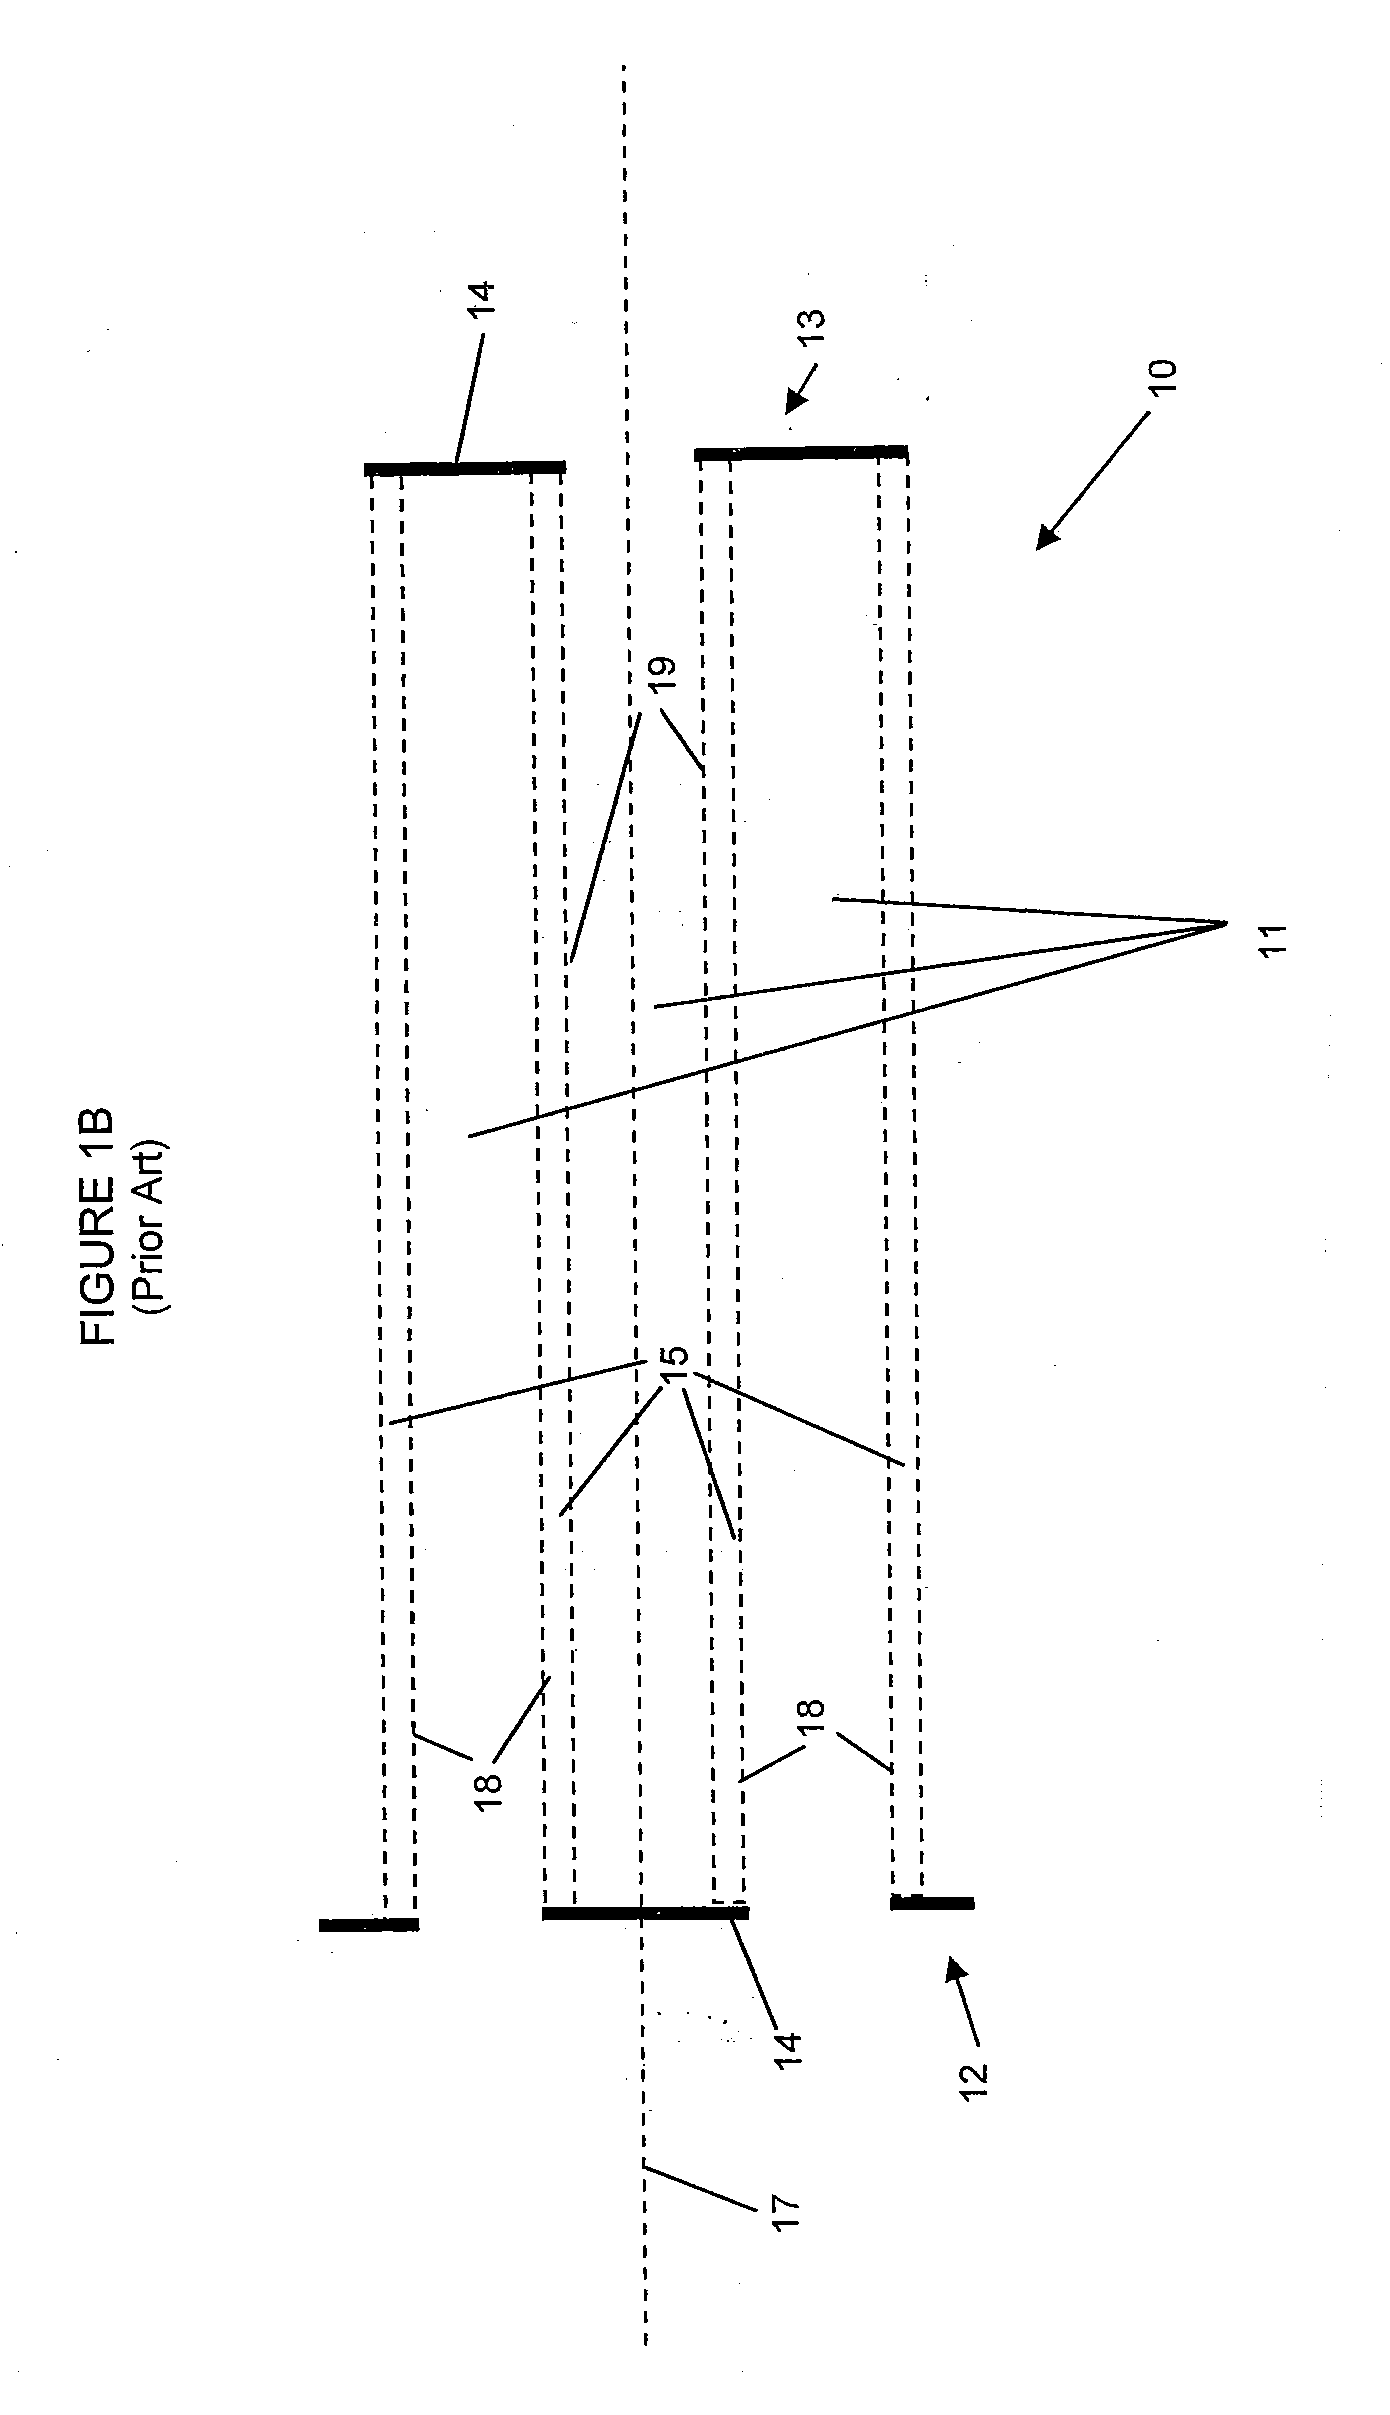 Zoned catalytic filters for treatment of exhaust gas